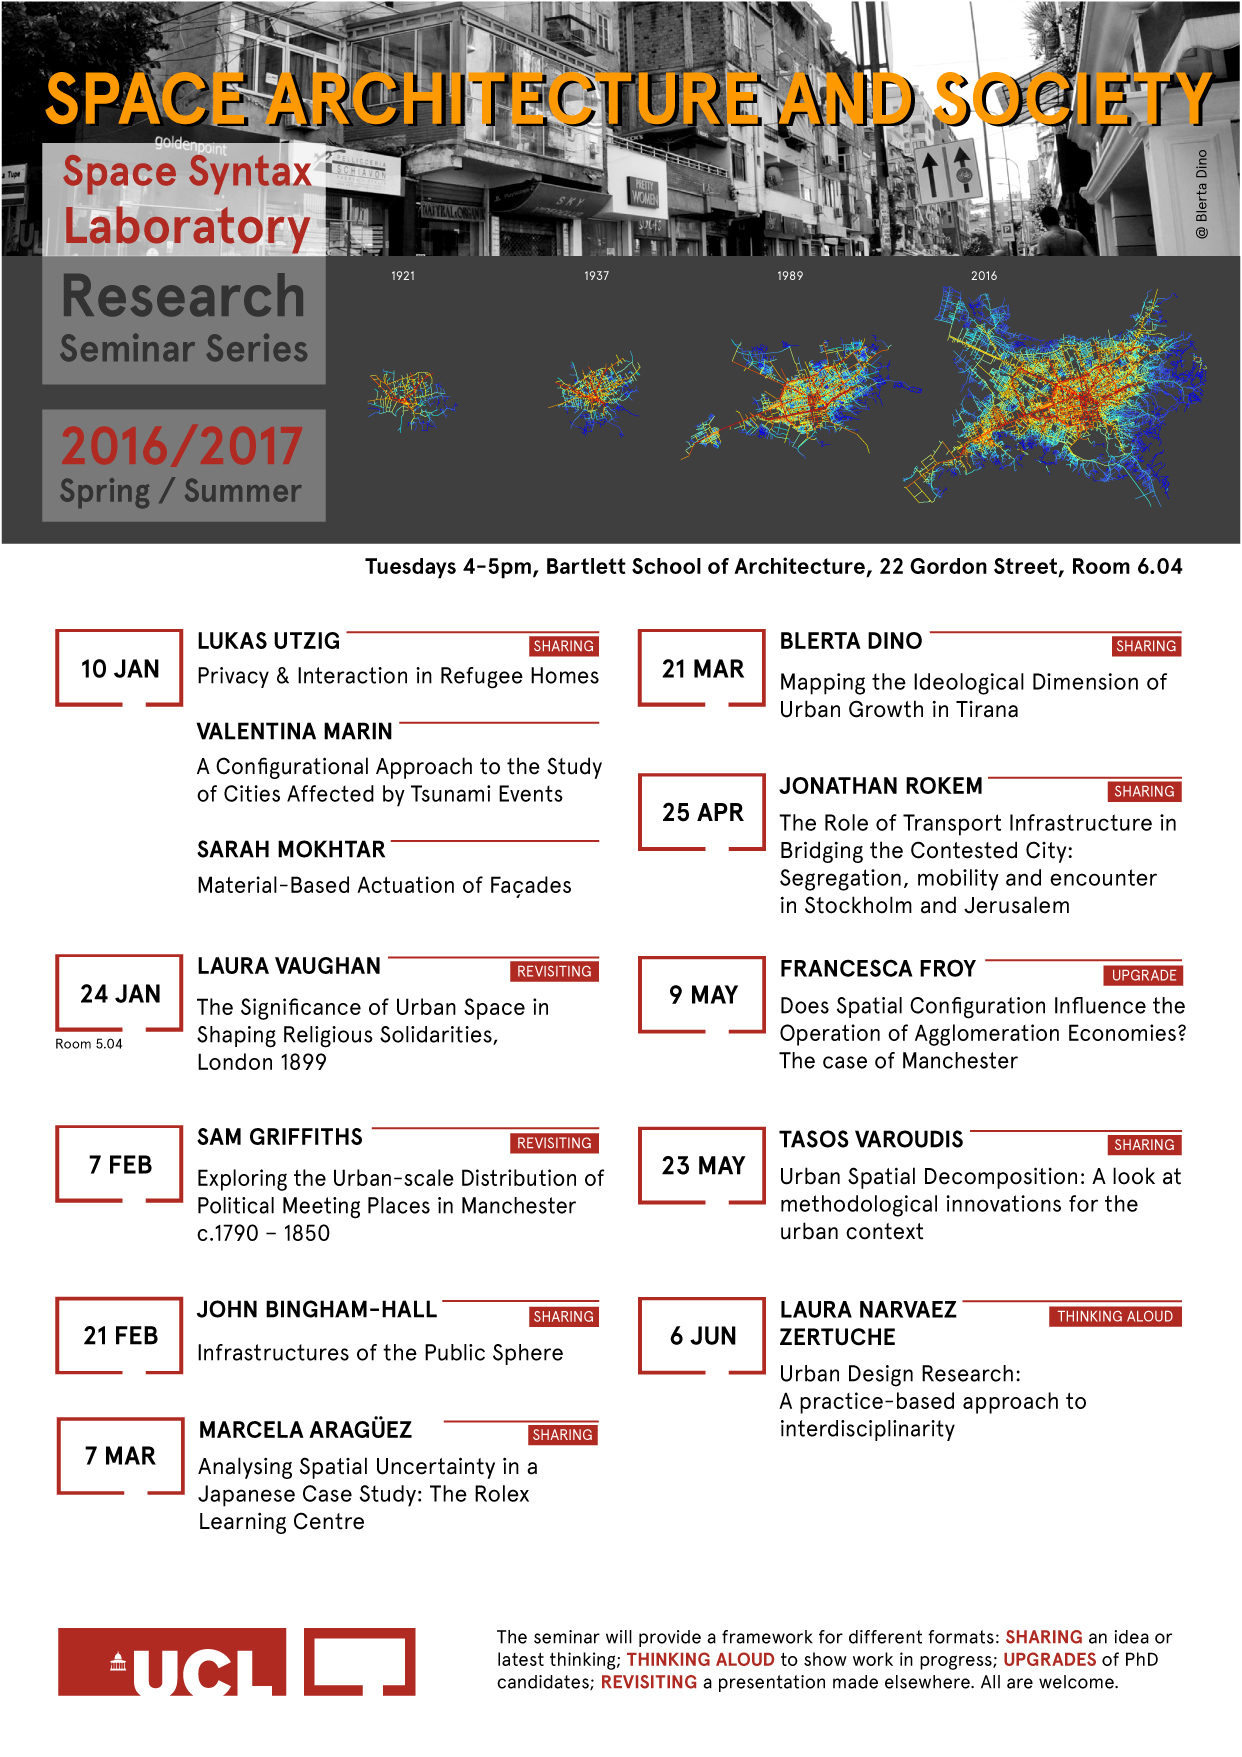 Space Syntax Laboratory Research Seminar Series